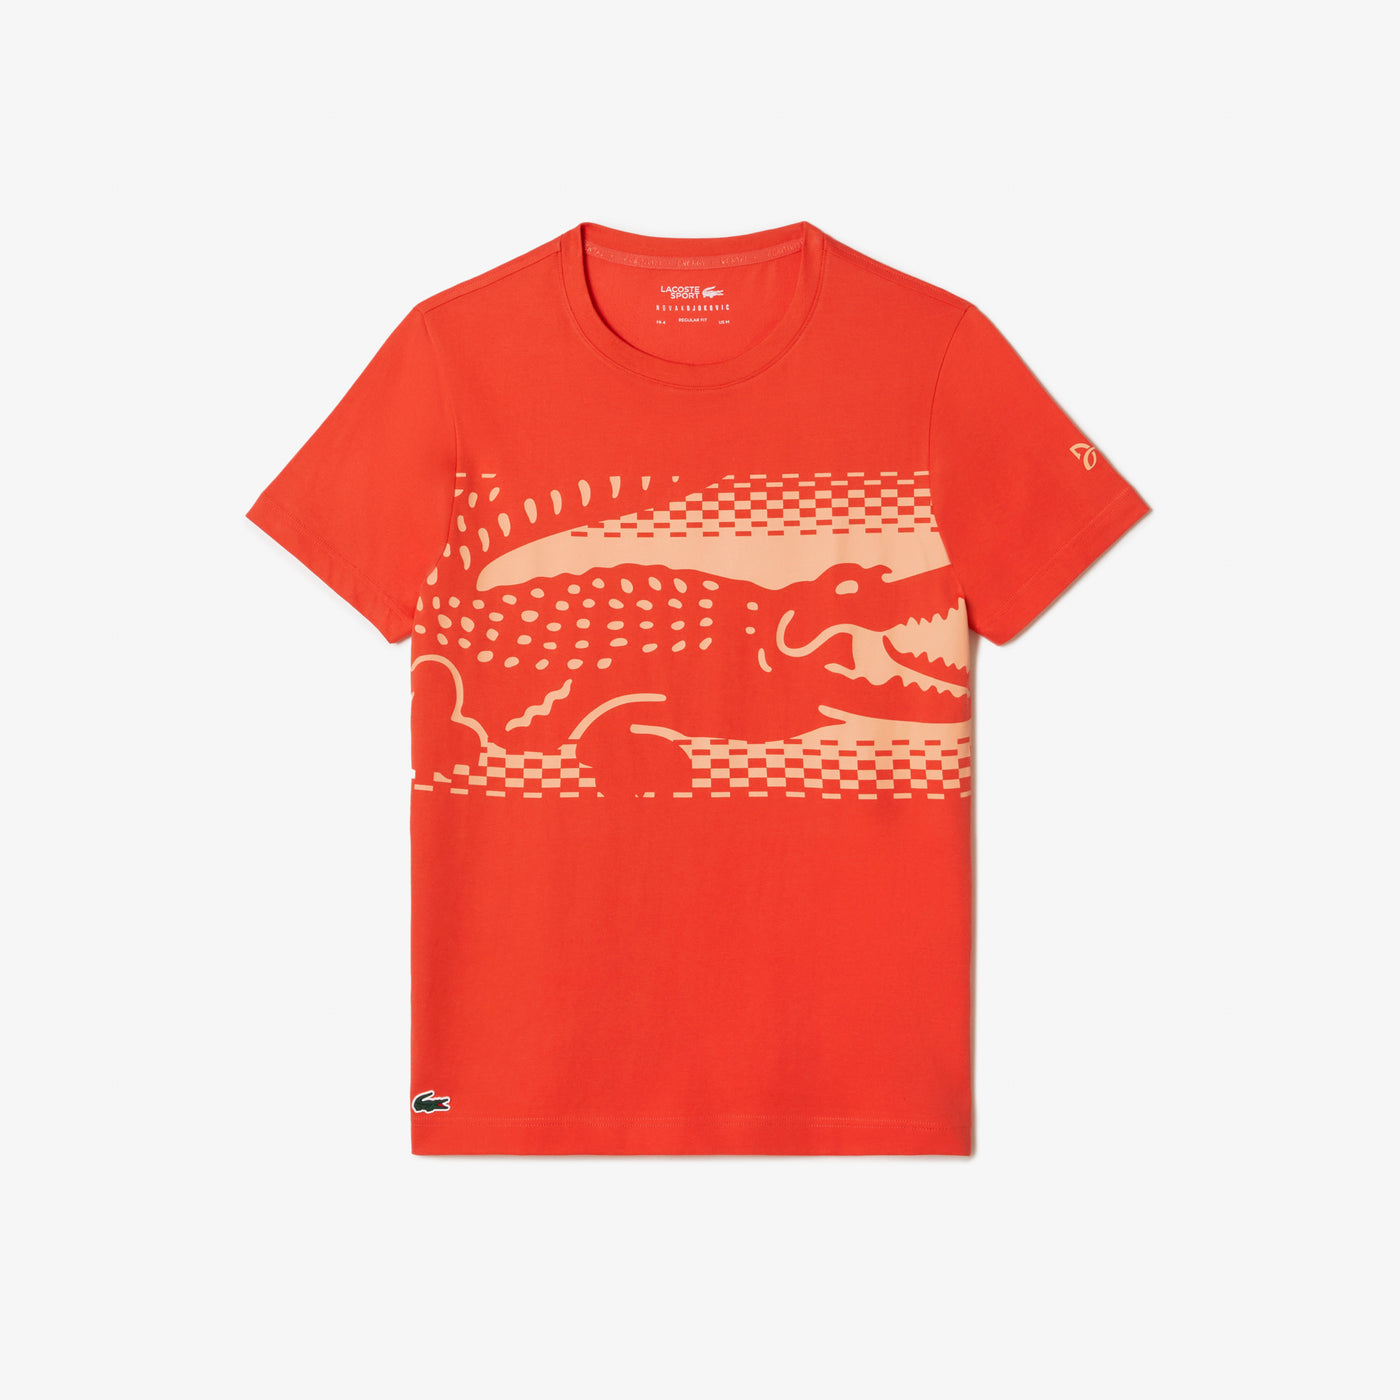 Shop The Latest Collection Of Lacoste Men’S Lacoste Tennis X Novak Djokovic T-Shirt - Th5195 In Lebanon